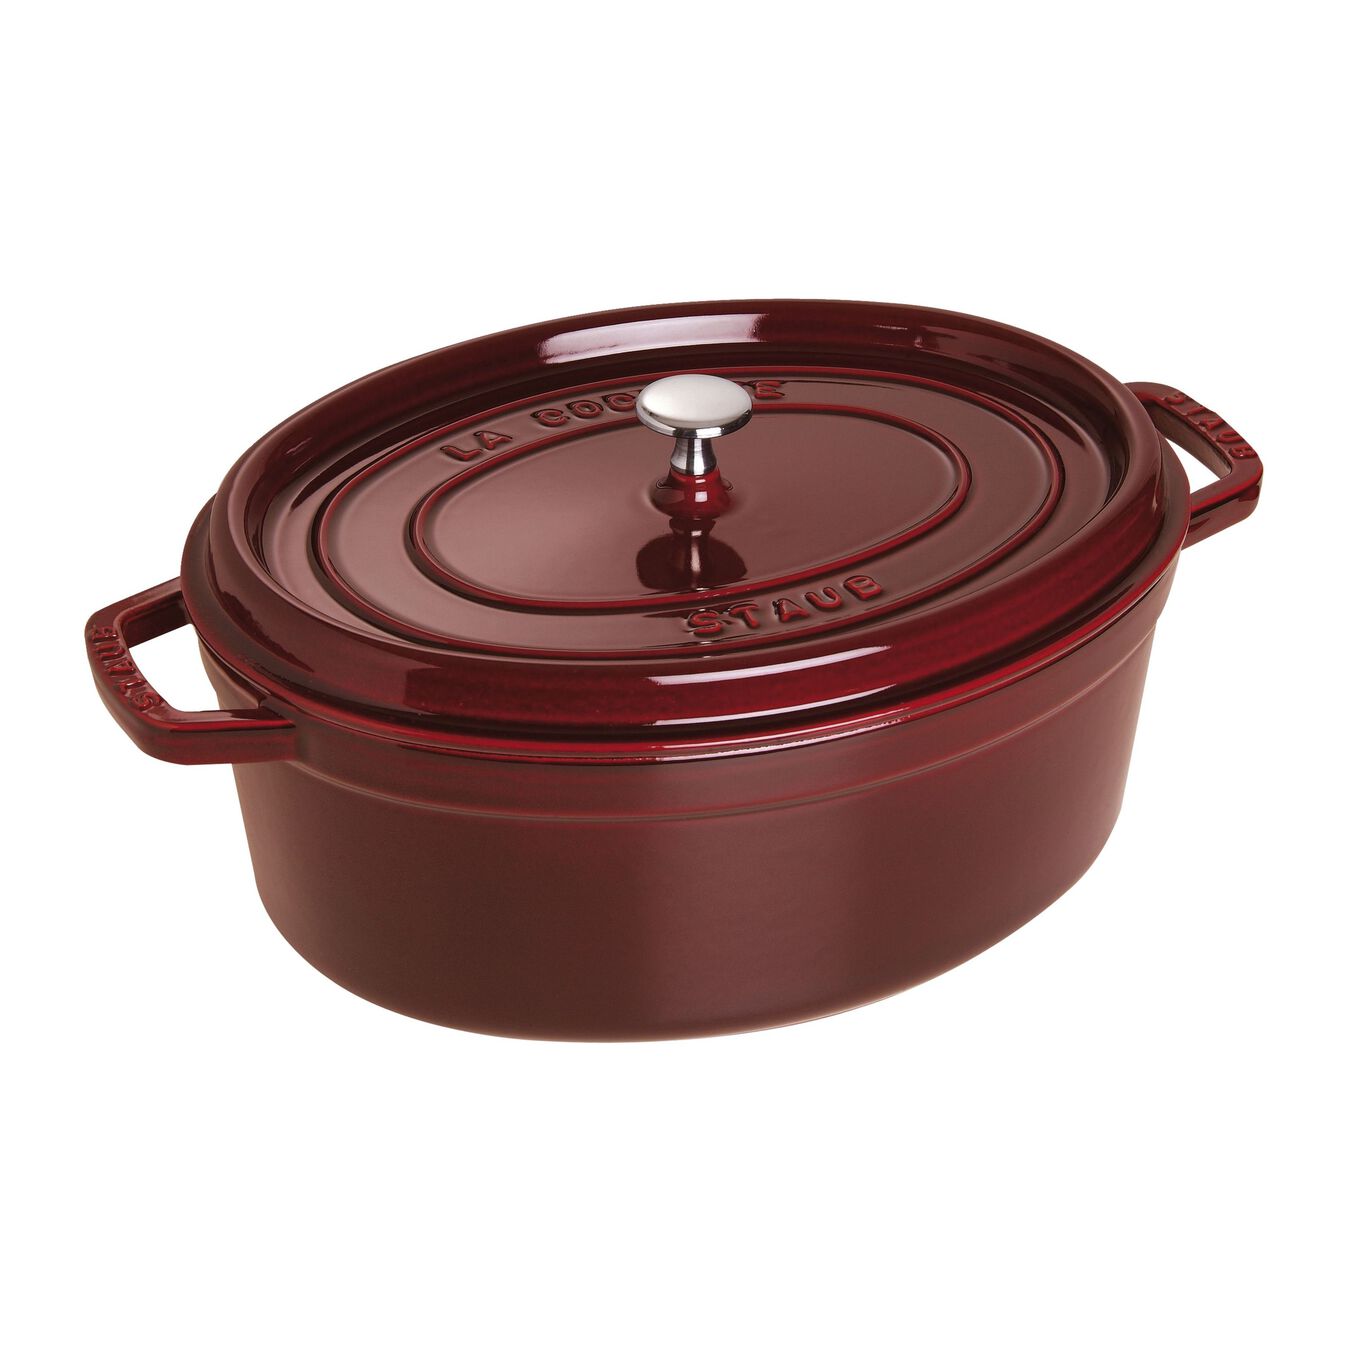 3.25 l cast iron oval Cocotte, grenadine-red,,large 1